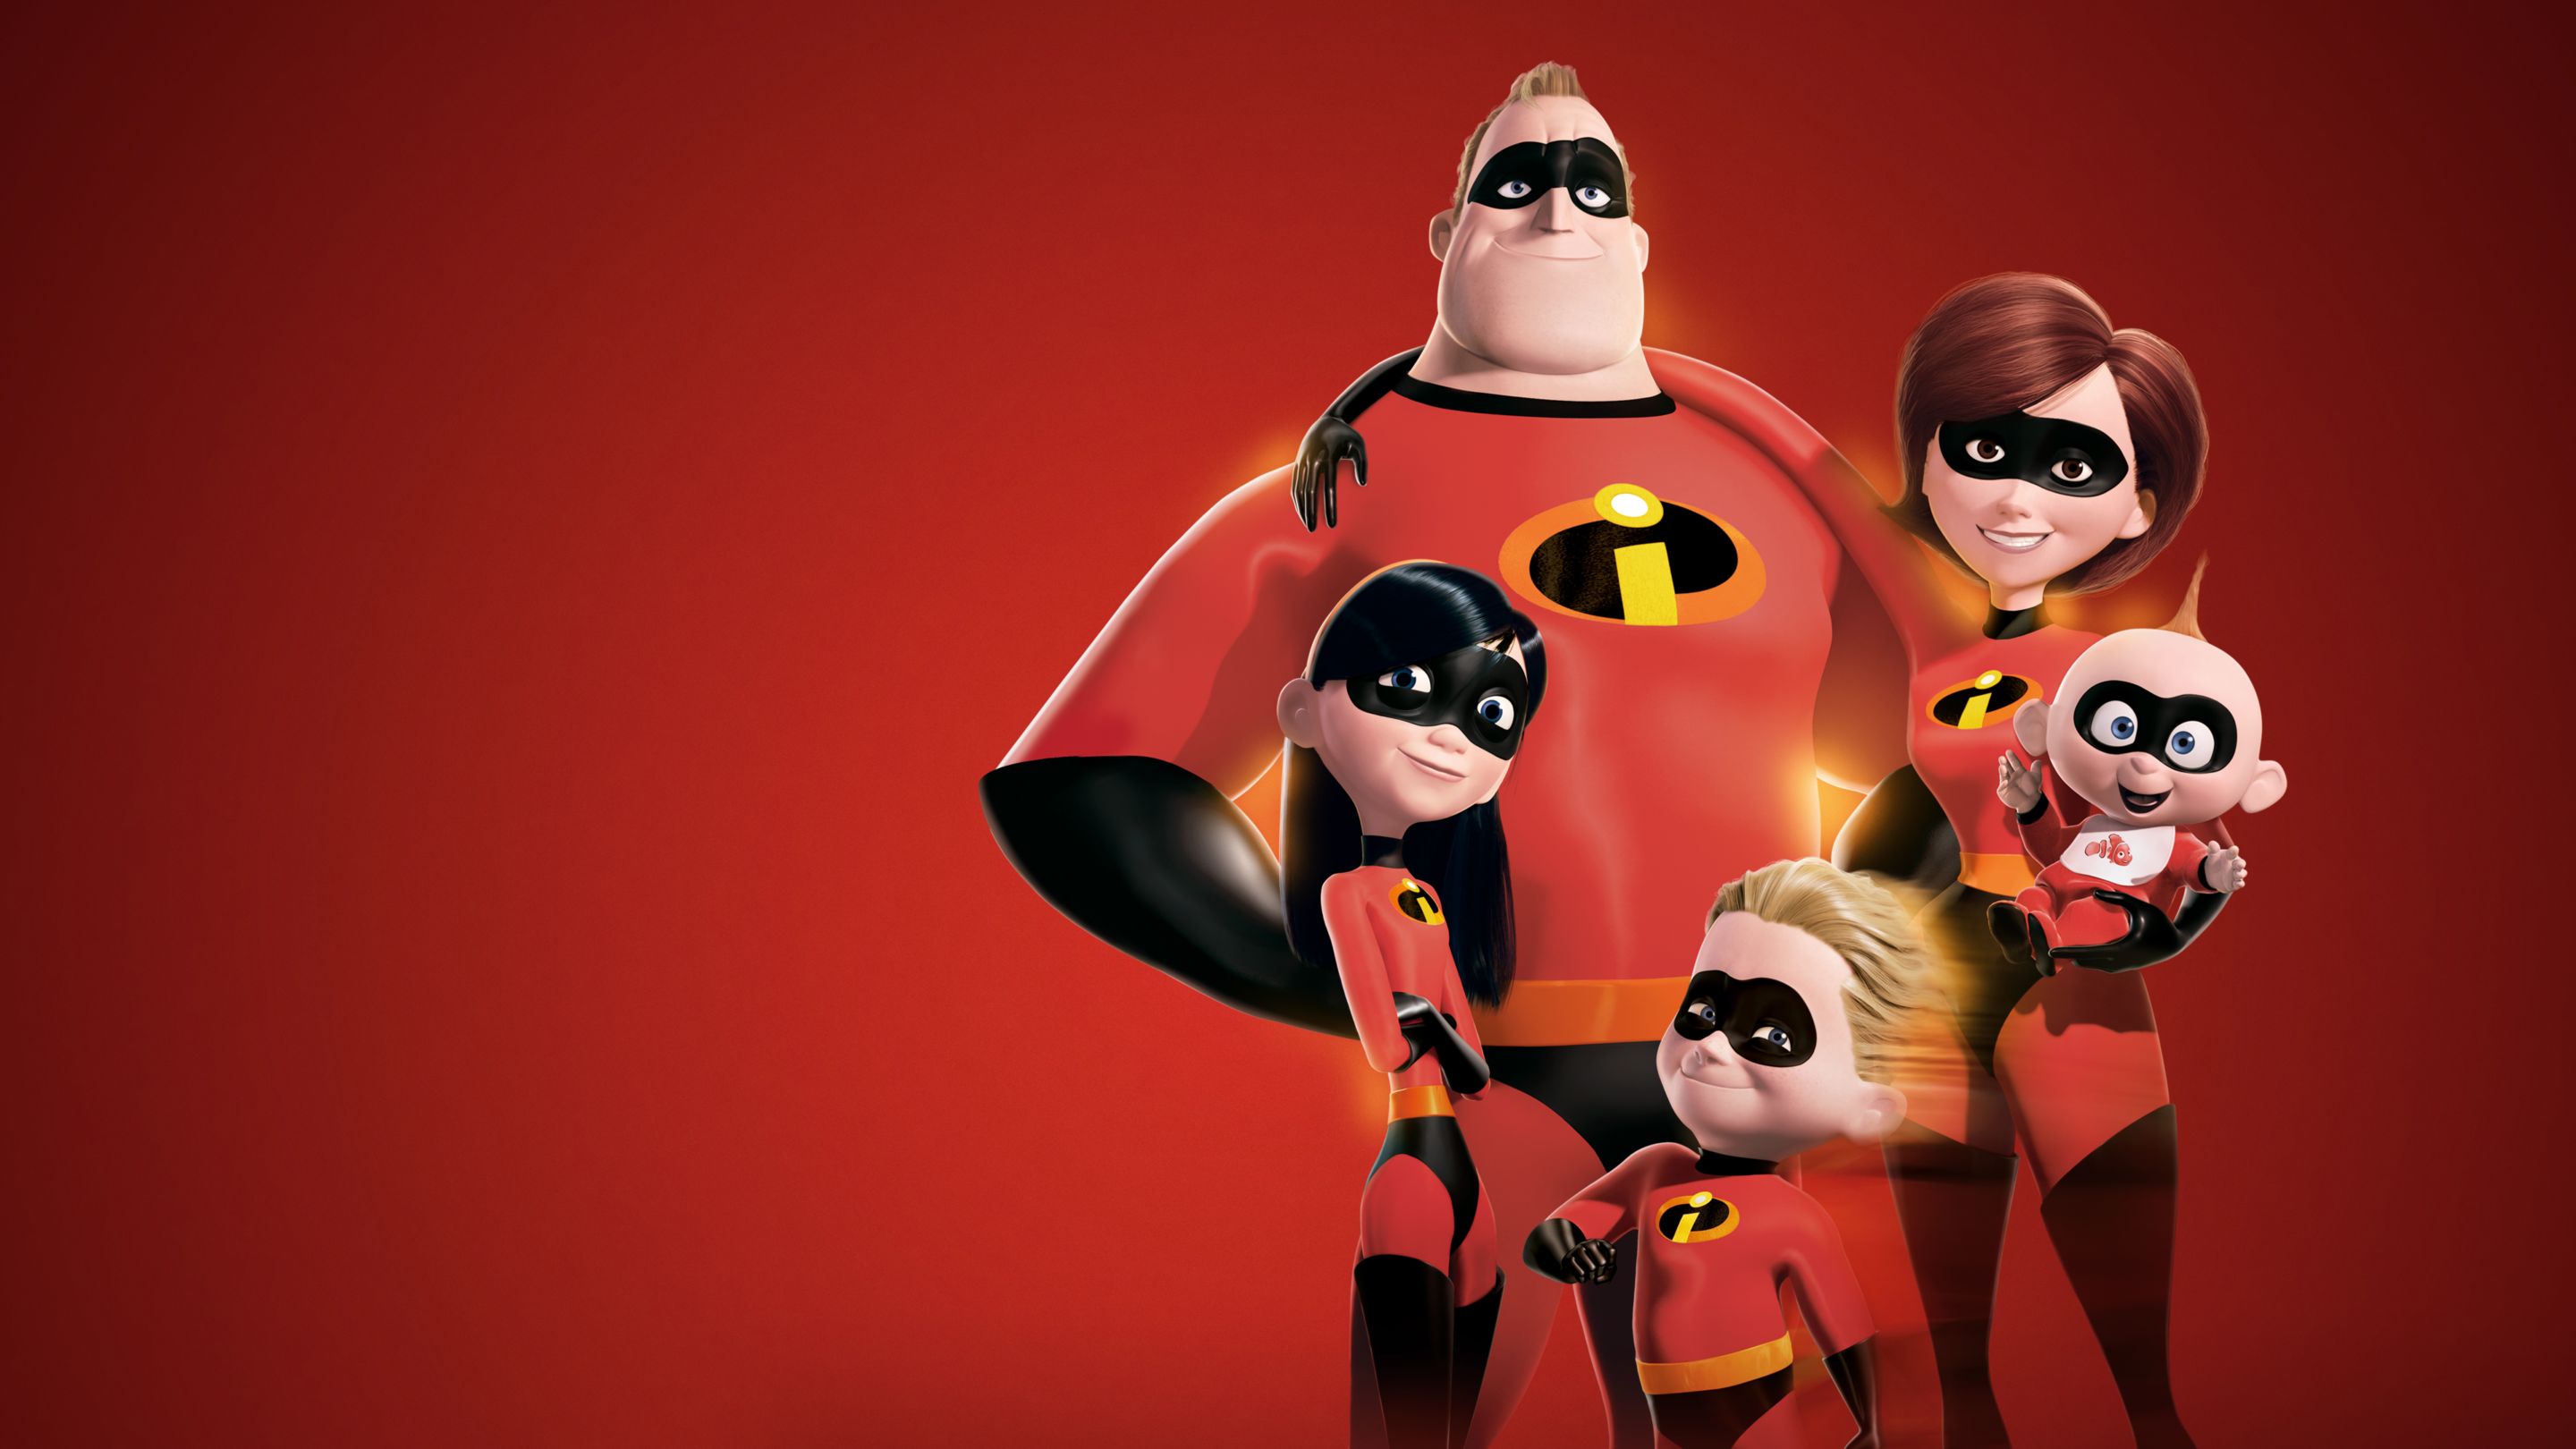 Incredibles 1 Full Movie 10 Incredibles 2 Ideas The Incredibles Full Movies Disney Pixar In